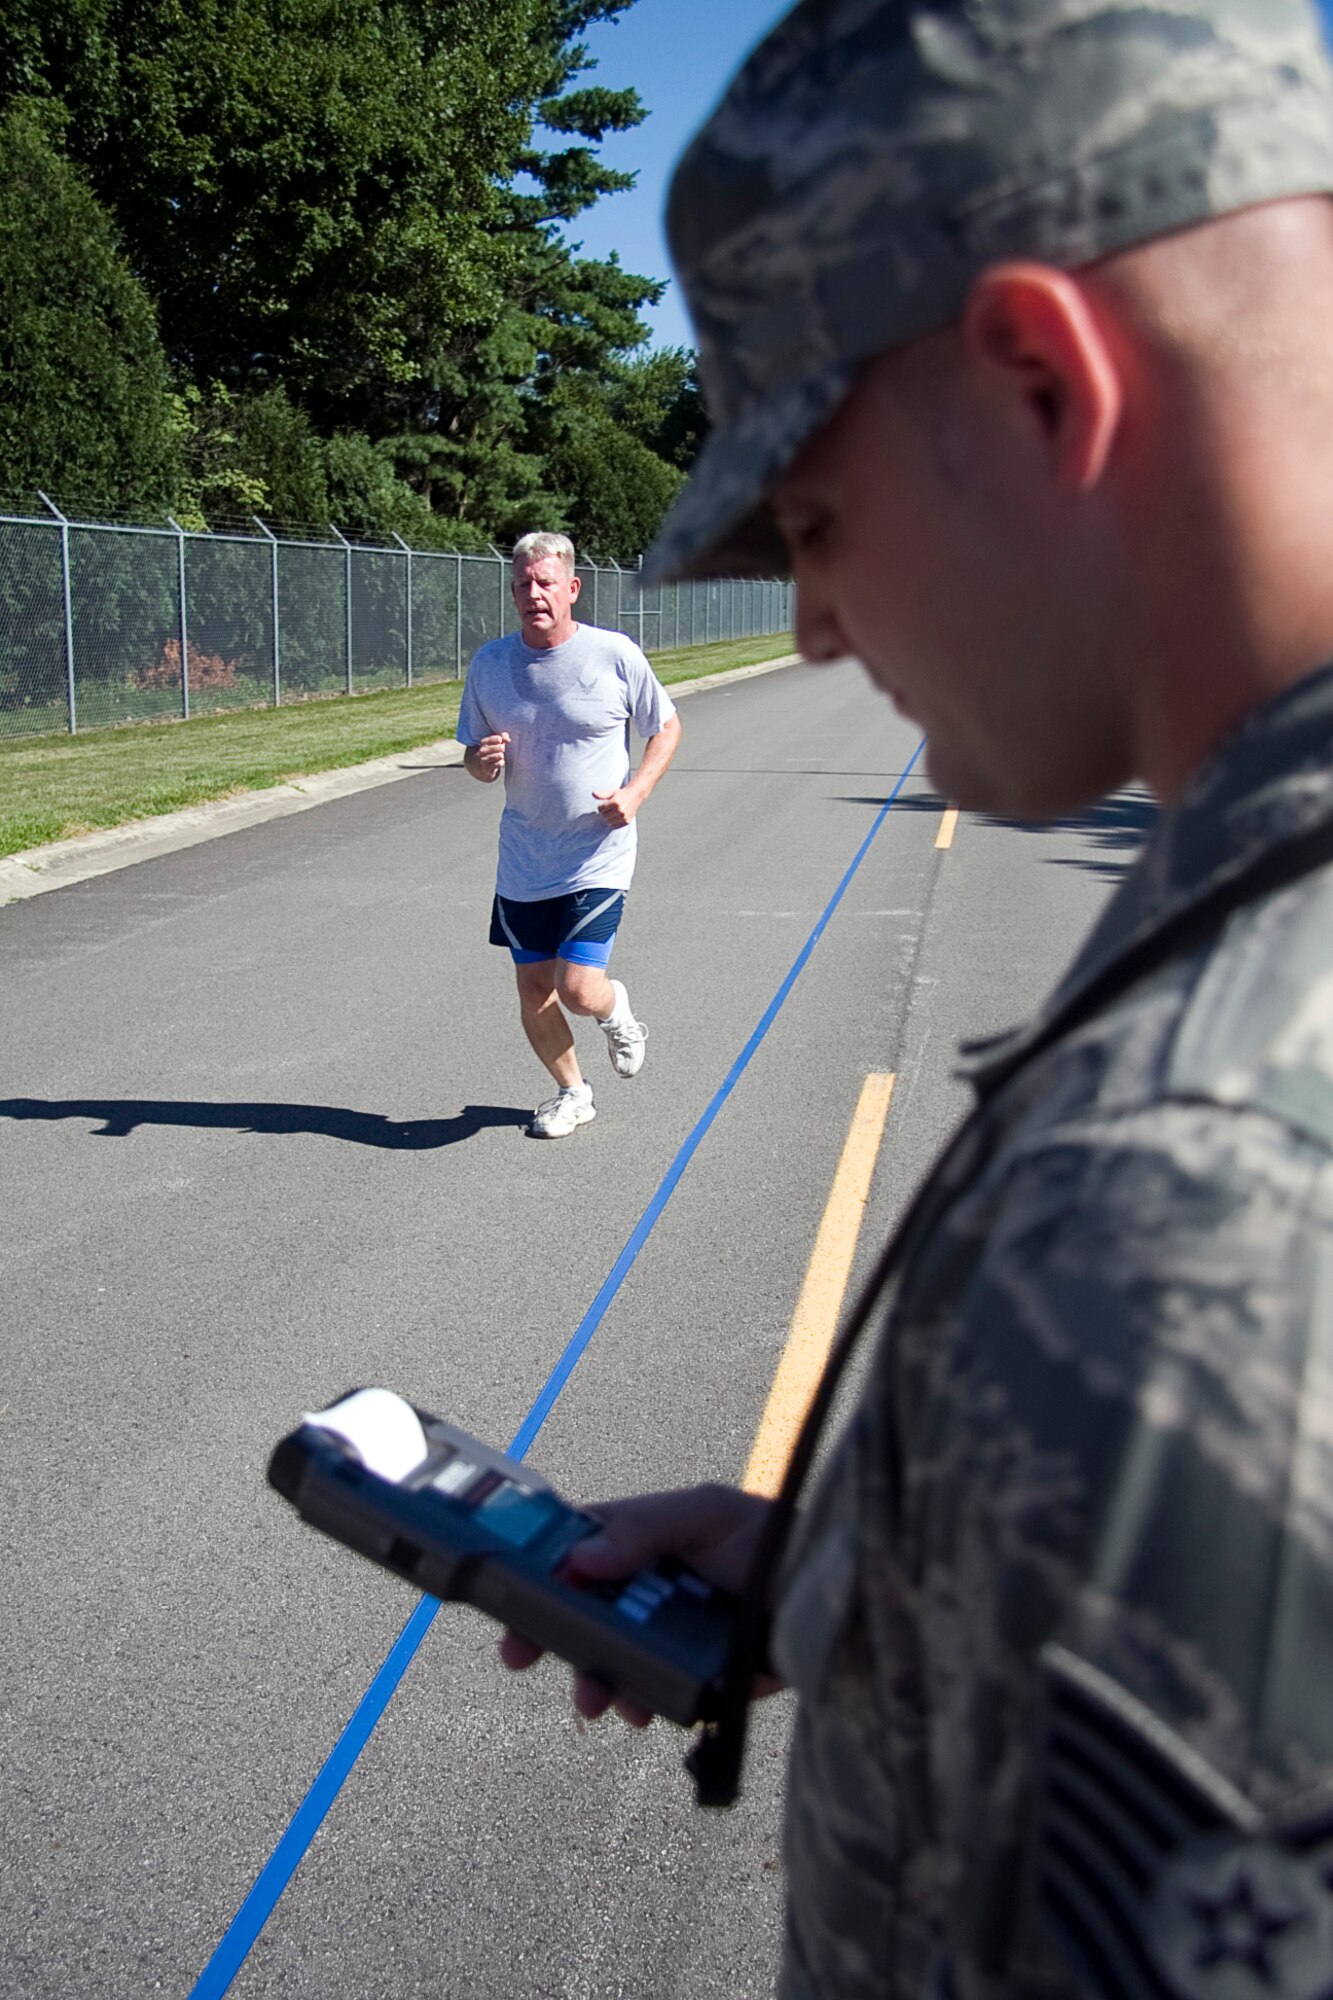 GRISSOM AIR RESERVE BASE, Ind. -- Senior Master Sgt. Richard Scully races to the finish line during a fitness test held here recently as Tech. Sgt. Traey Corbin clocks in his time. Starting in July, the Air Force implemented new fitness assessment standards, which now include bi-annual testing, minimum requirements within testing components and establishing fitness assessment cells to proctor tests. The aerobic component counts for 60 of the possible 100 points. Sergeant Scully is a chief of quality assurance with the 434th Maintenance Group, and Sergeant Corbin is a services specialist with the 434th Services Flight. (U.S. Air Force photo/Tech. Sgt. Mark R. W. Orders-Woempner)